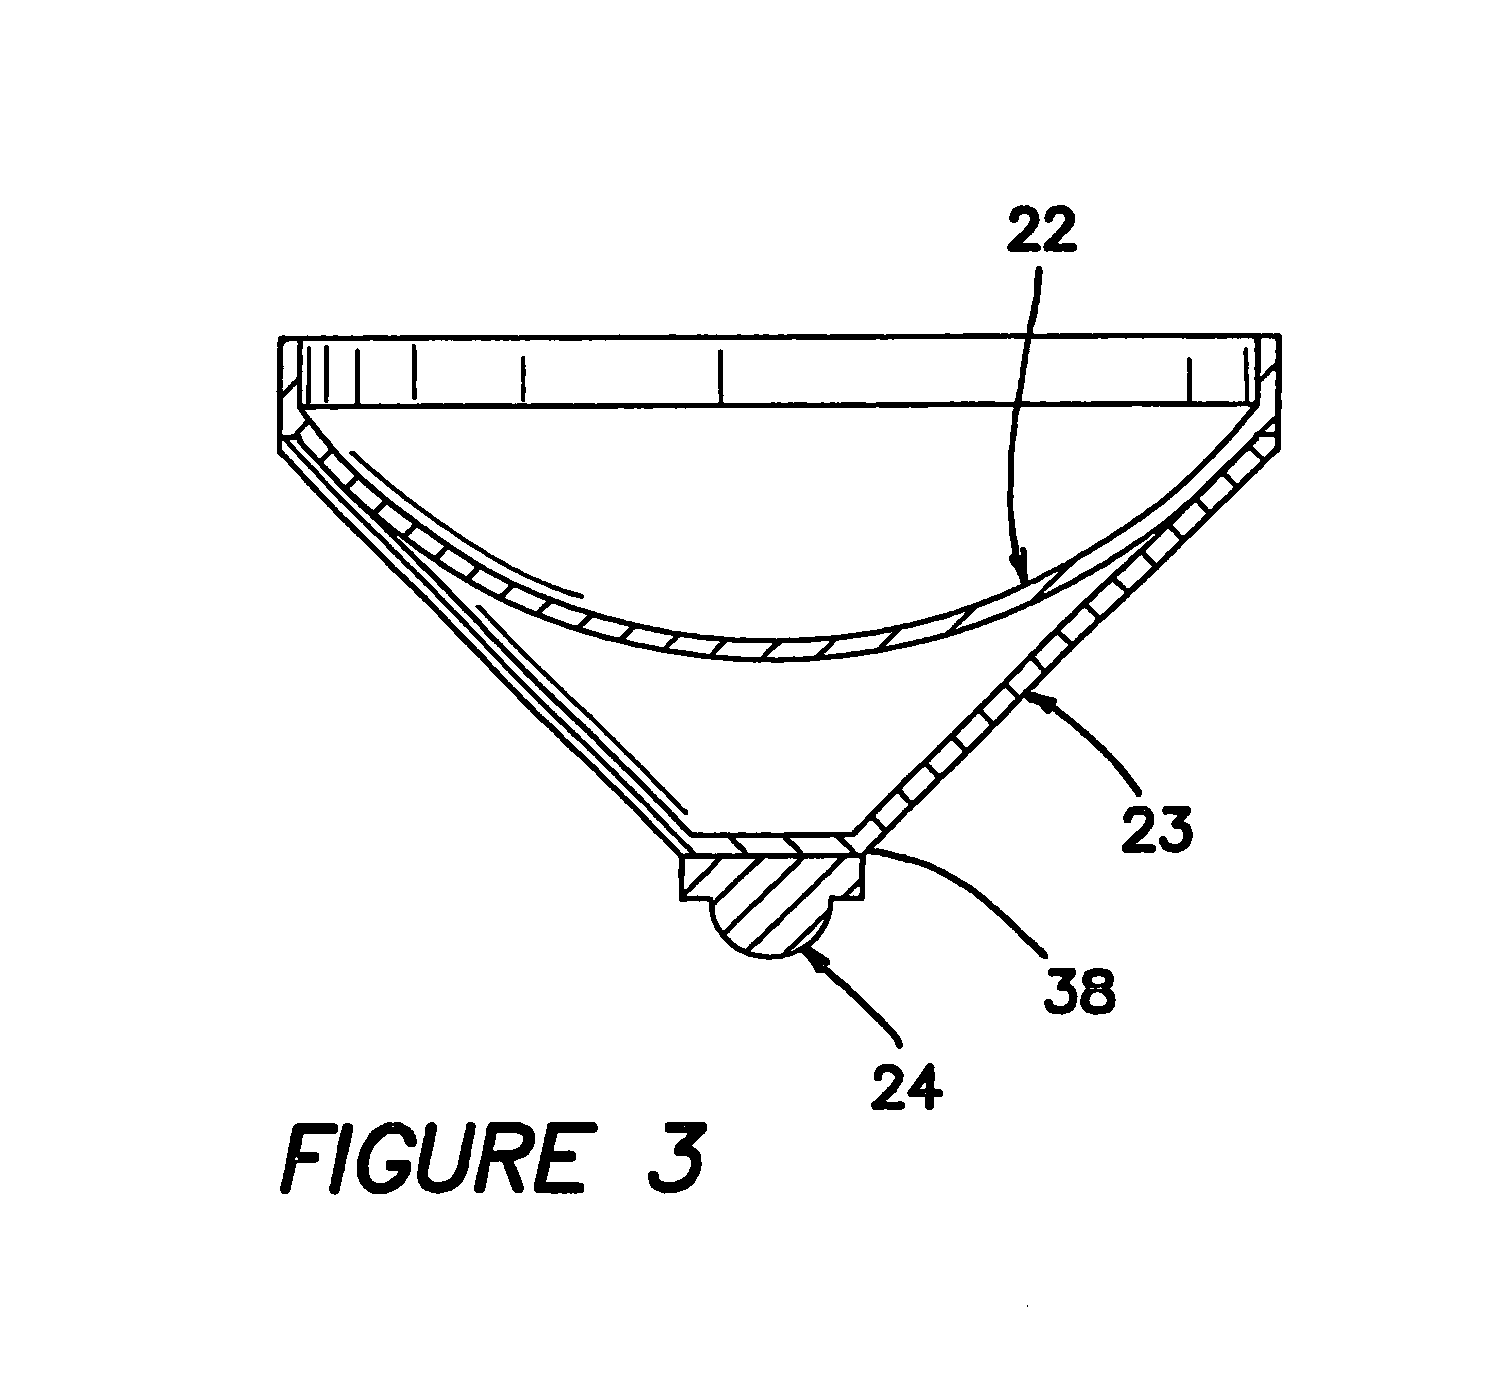 Apparatus and method for using emitting diodes (LED) in a side-emitting device